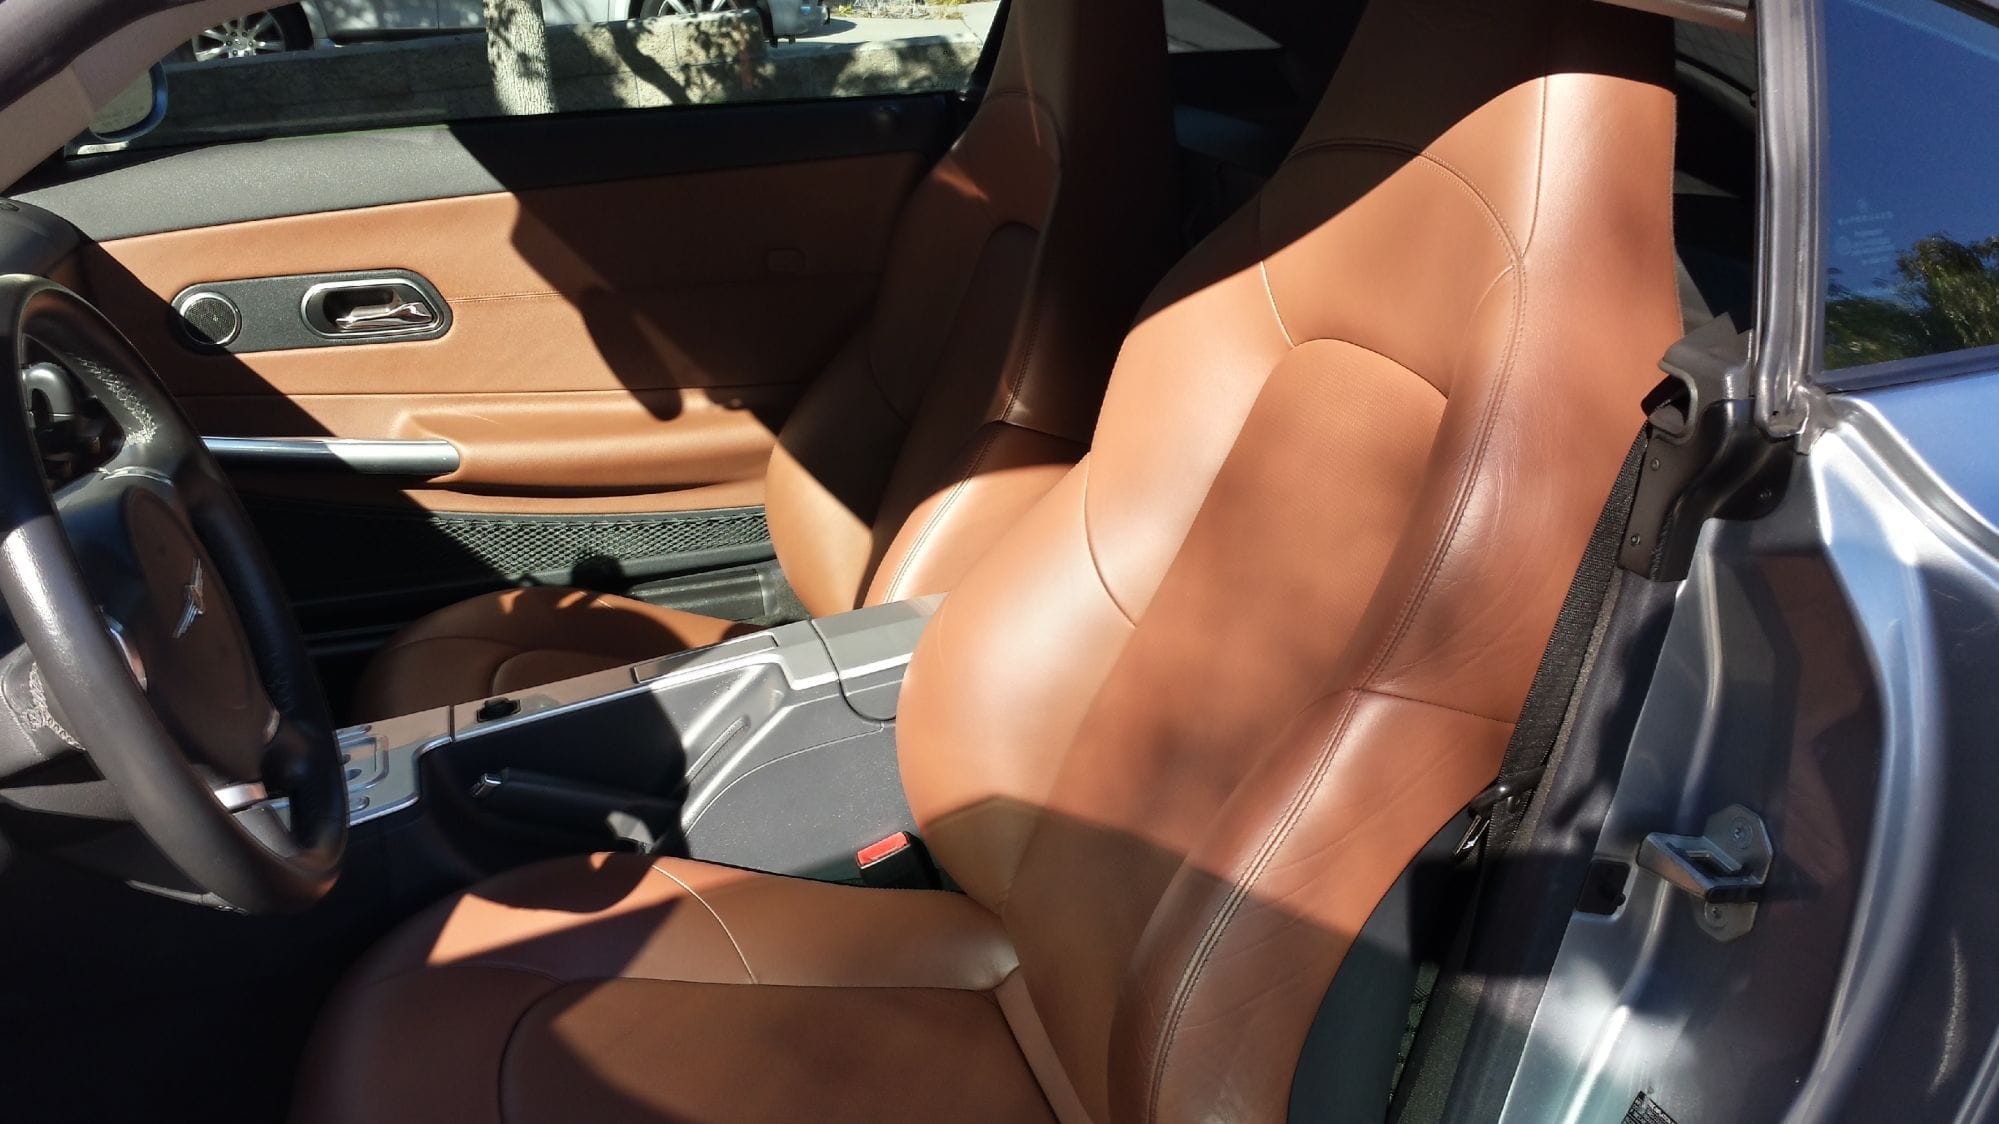 BMW Upholstery Paint - They Didn't Know if it was ColorBond or the